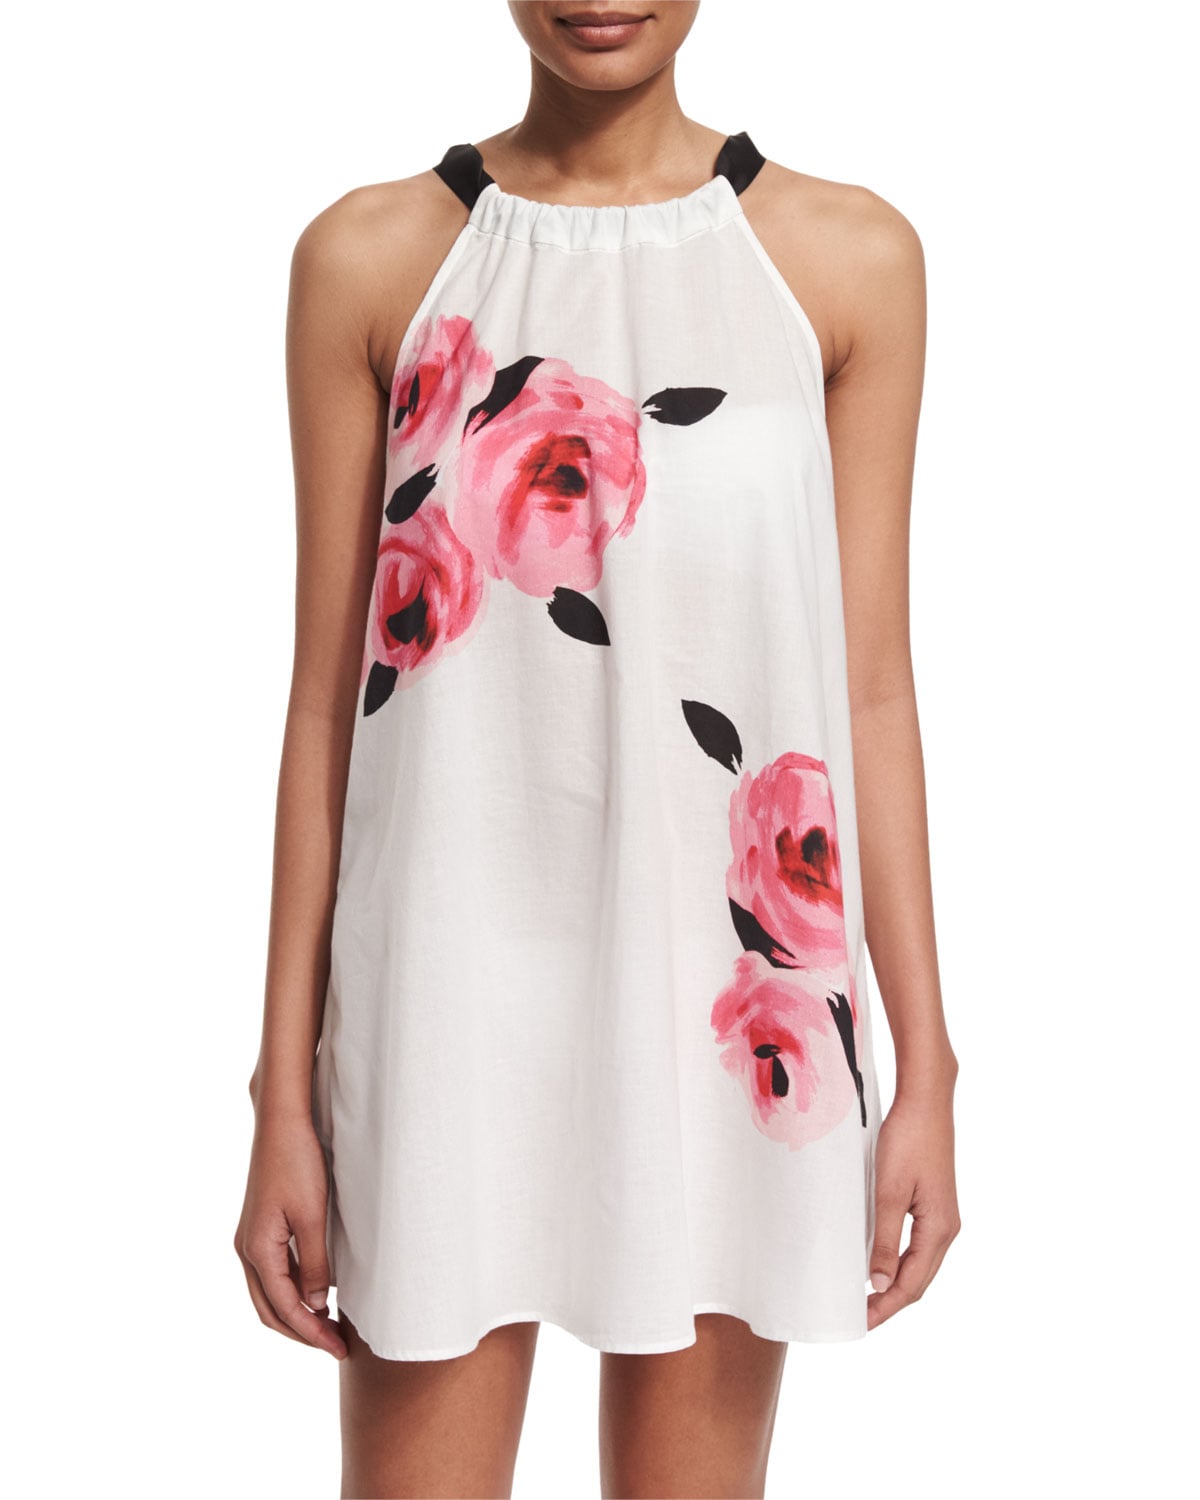 Kate Spade Paloma Beach Printed Sleeveless Coverup Dress ($120) | 31 Cover- Ups So Flattering, You Might Not Want to Take Them Off | POPSUGAR Fashion  Photo 18